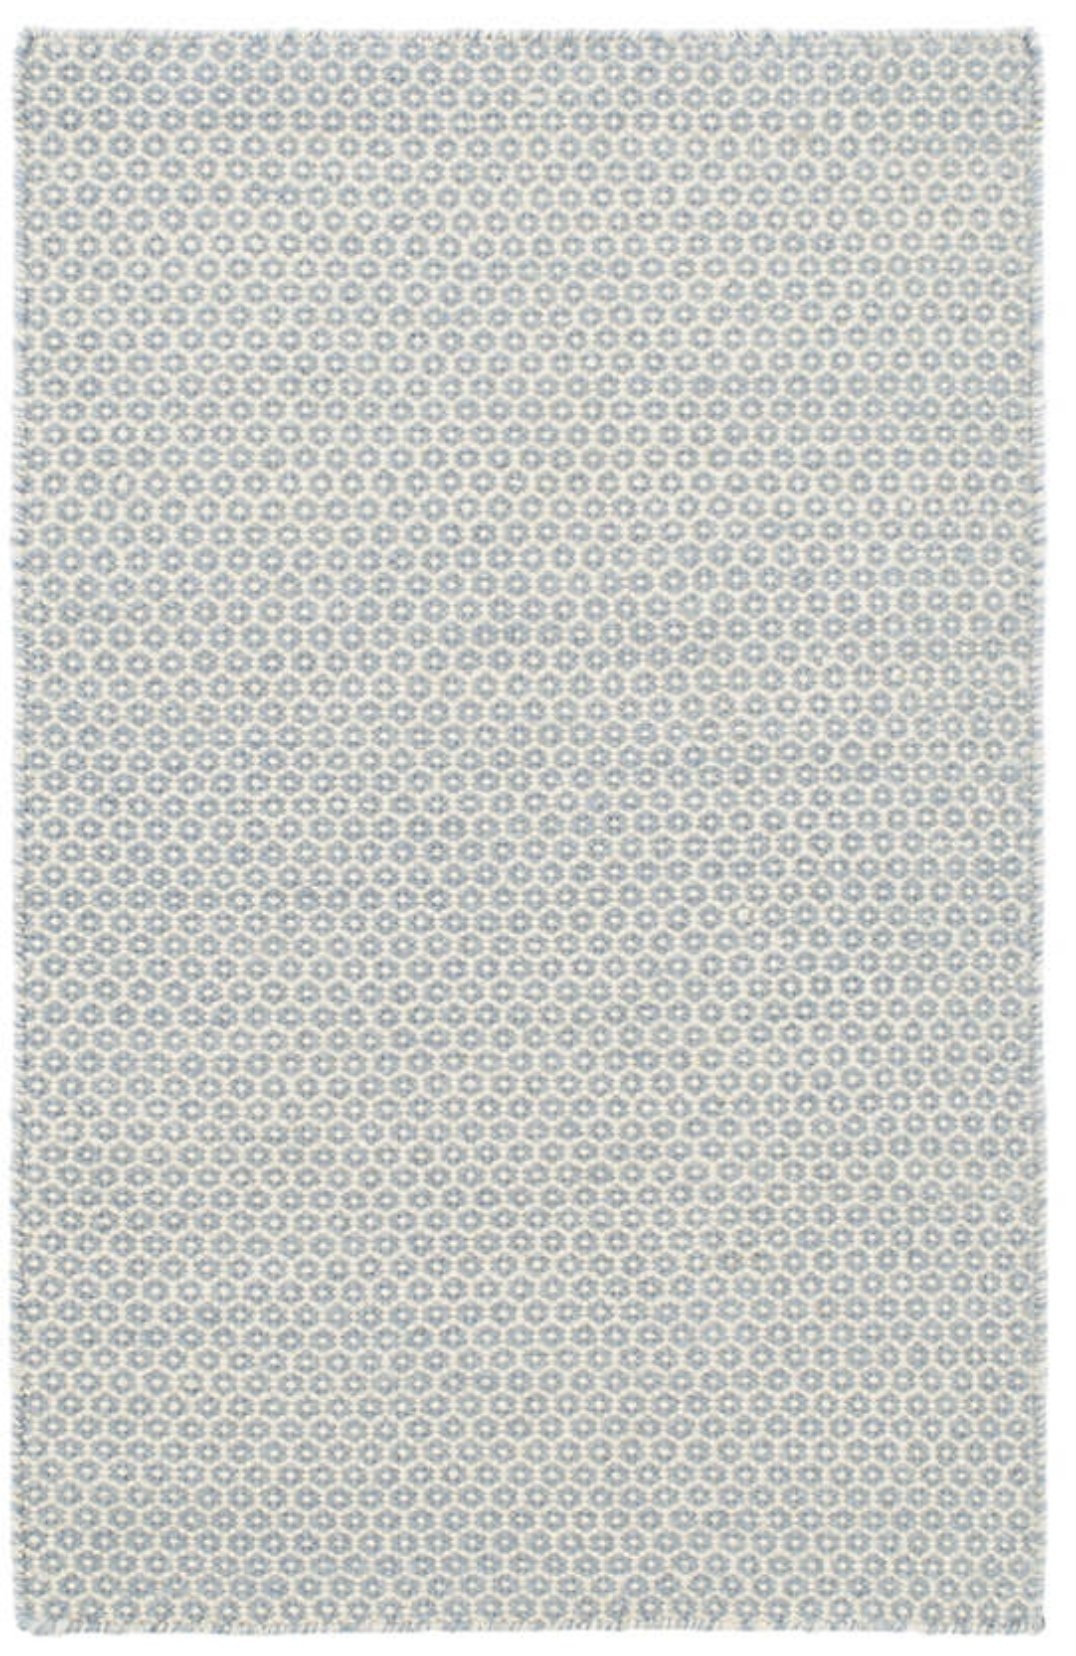 HONEYCOMB FRENCH BLUE/IVORY WOVEN WOOL RUG 2' x 3' - Image 0